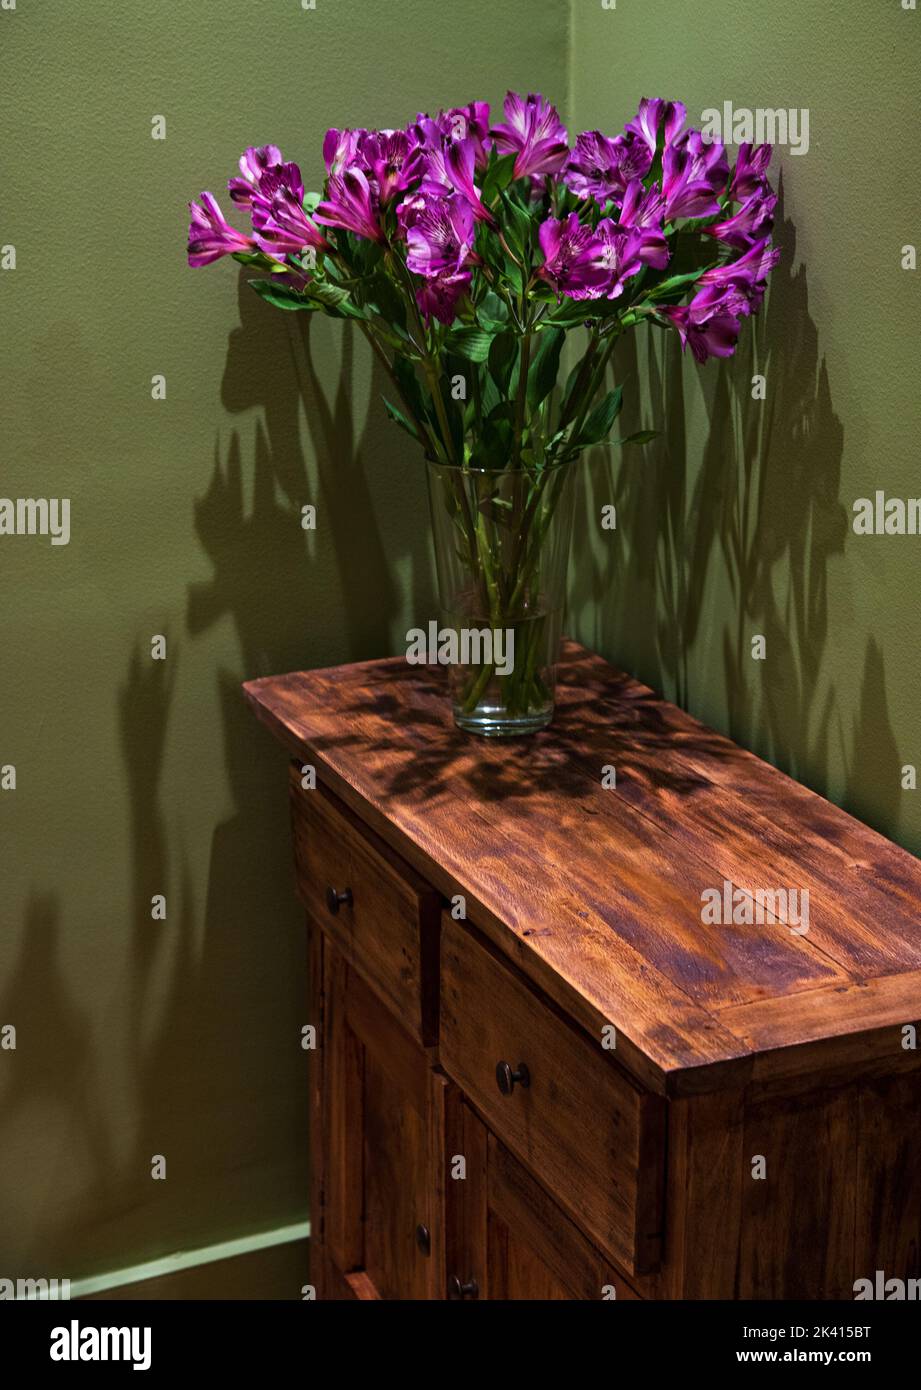 Lily flowers bouquet on vintage wooden chest of drawers in green painted room. Rustic interior ideas concept. Lifestyle background. Stock Photo